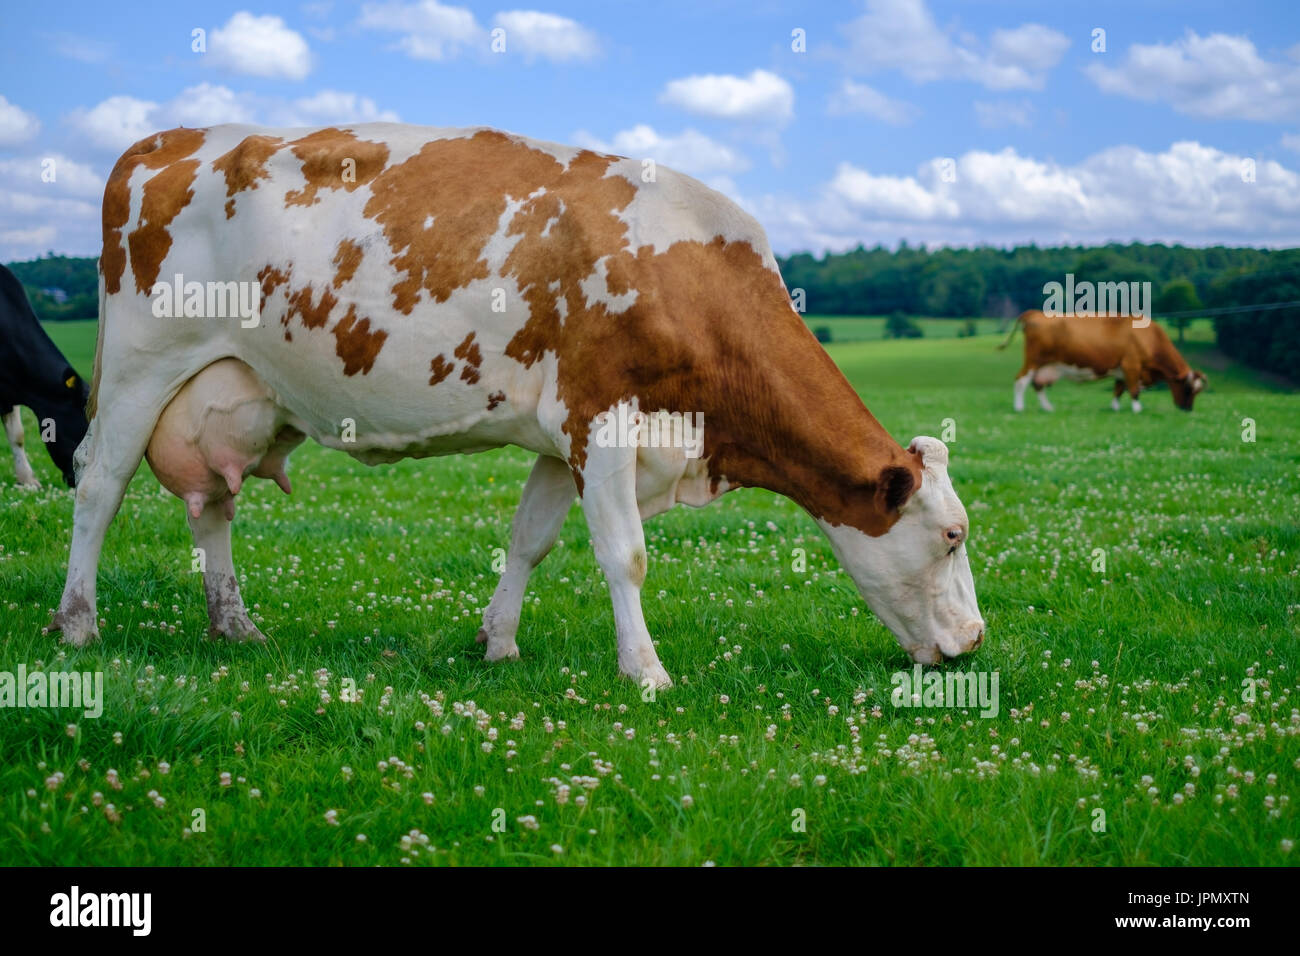 The wild brown cow is eating grass Stock Photo